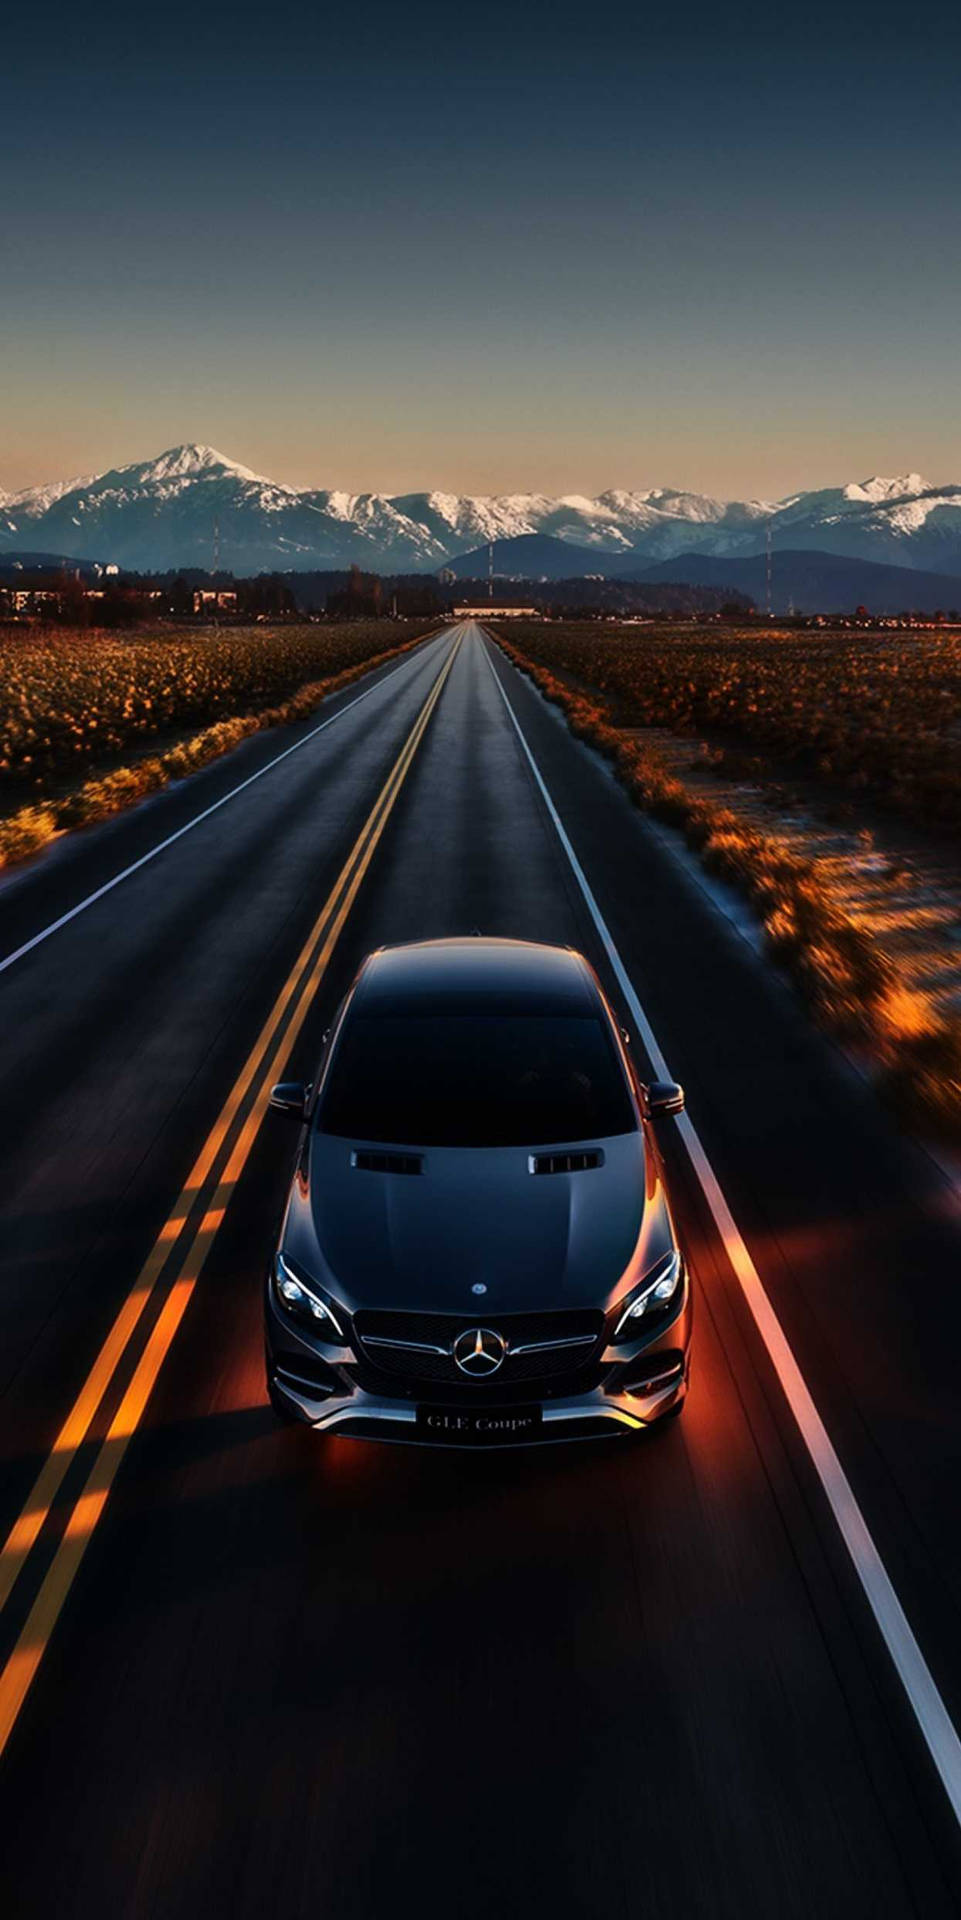 Mercedes Benz On The Road Iphone Wallpaper